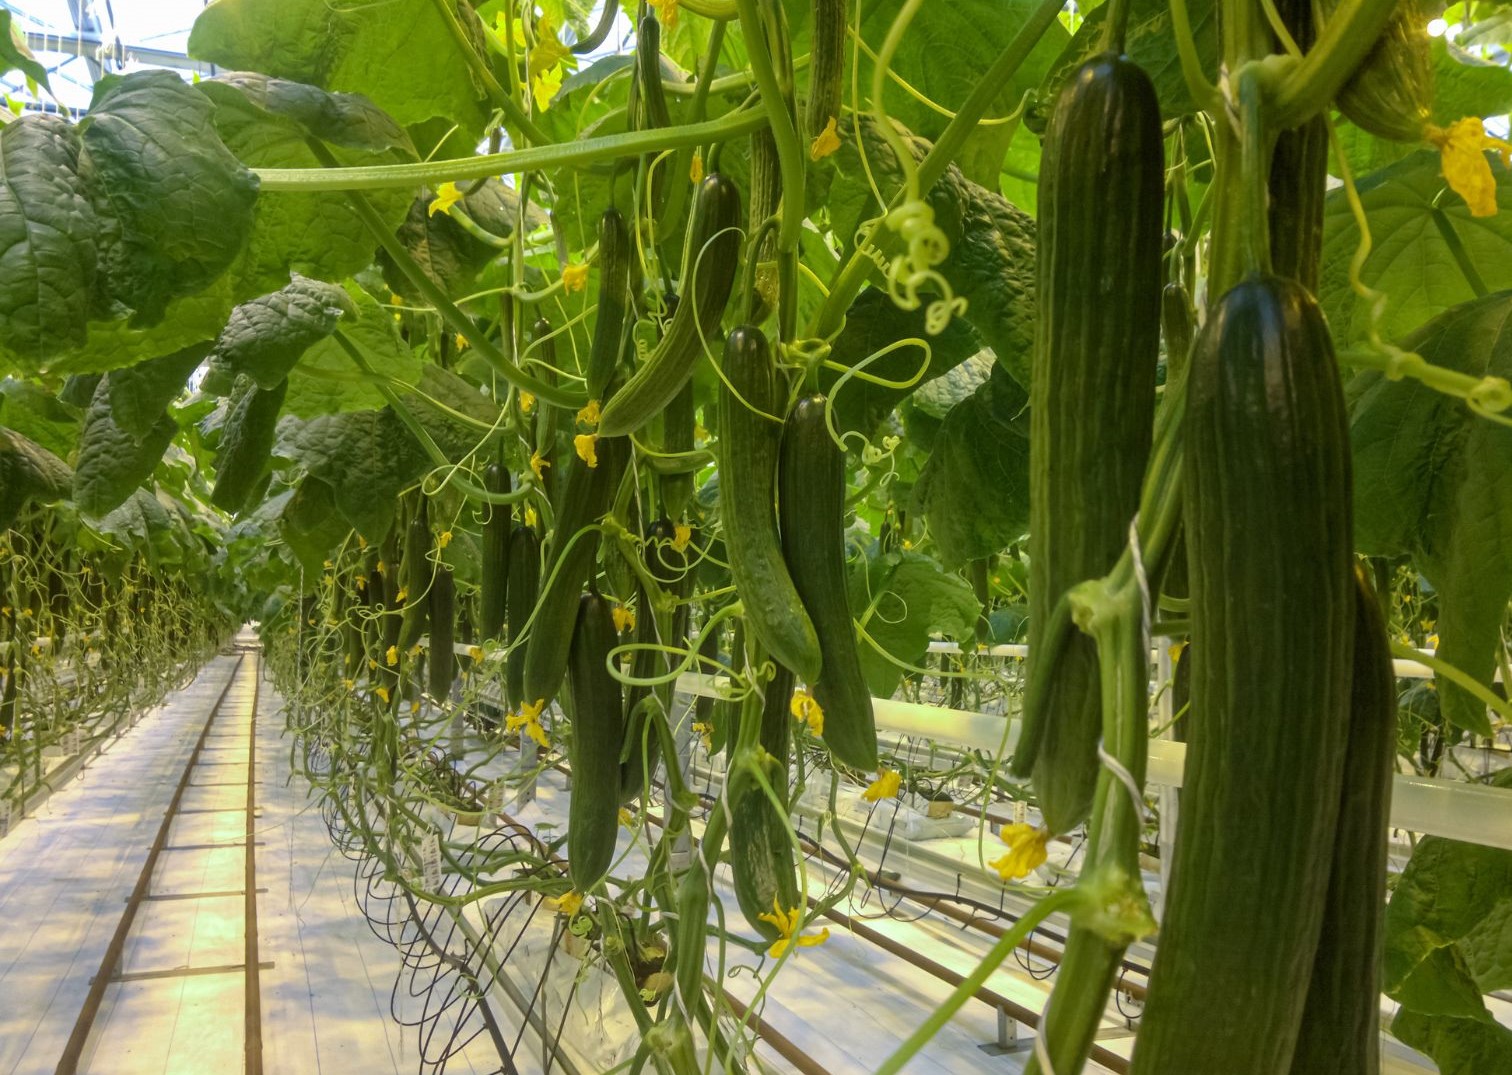 How to grow cucumber for profit - Commercial cucumber cultivation